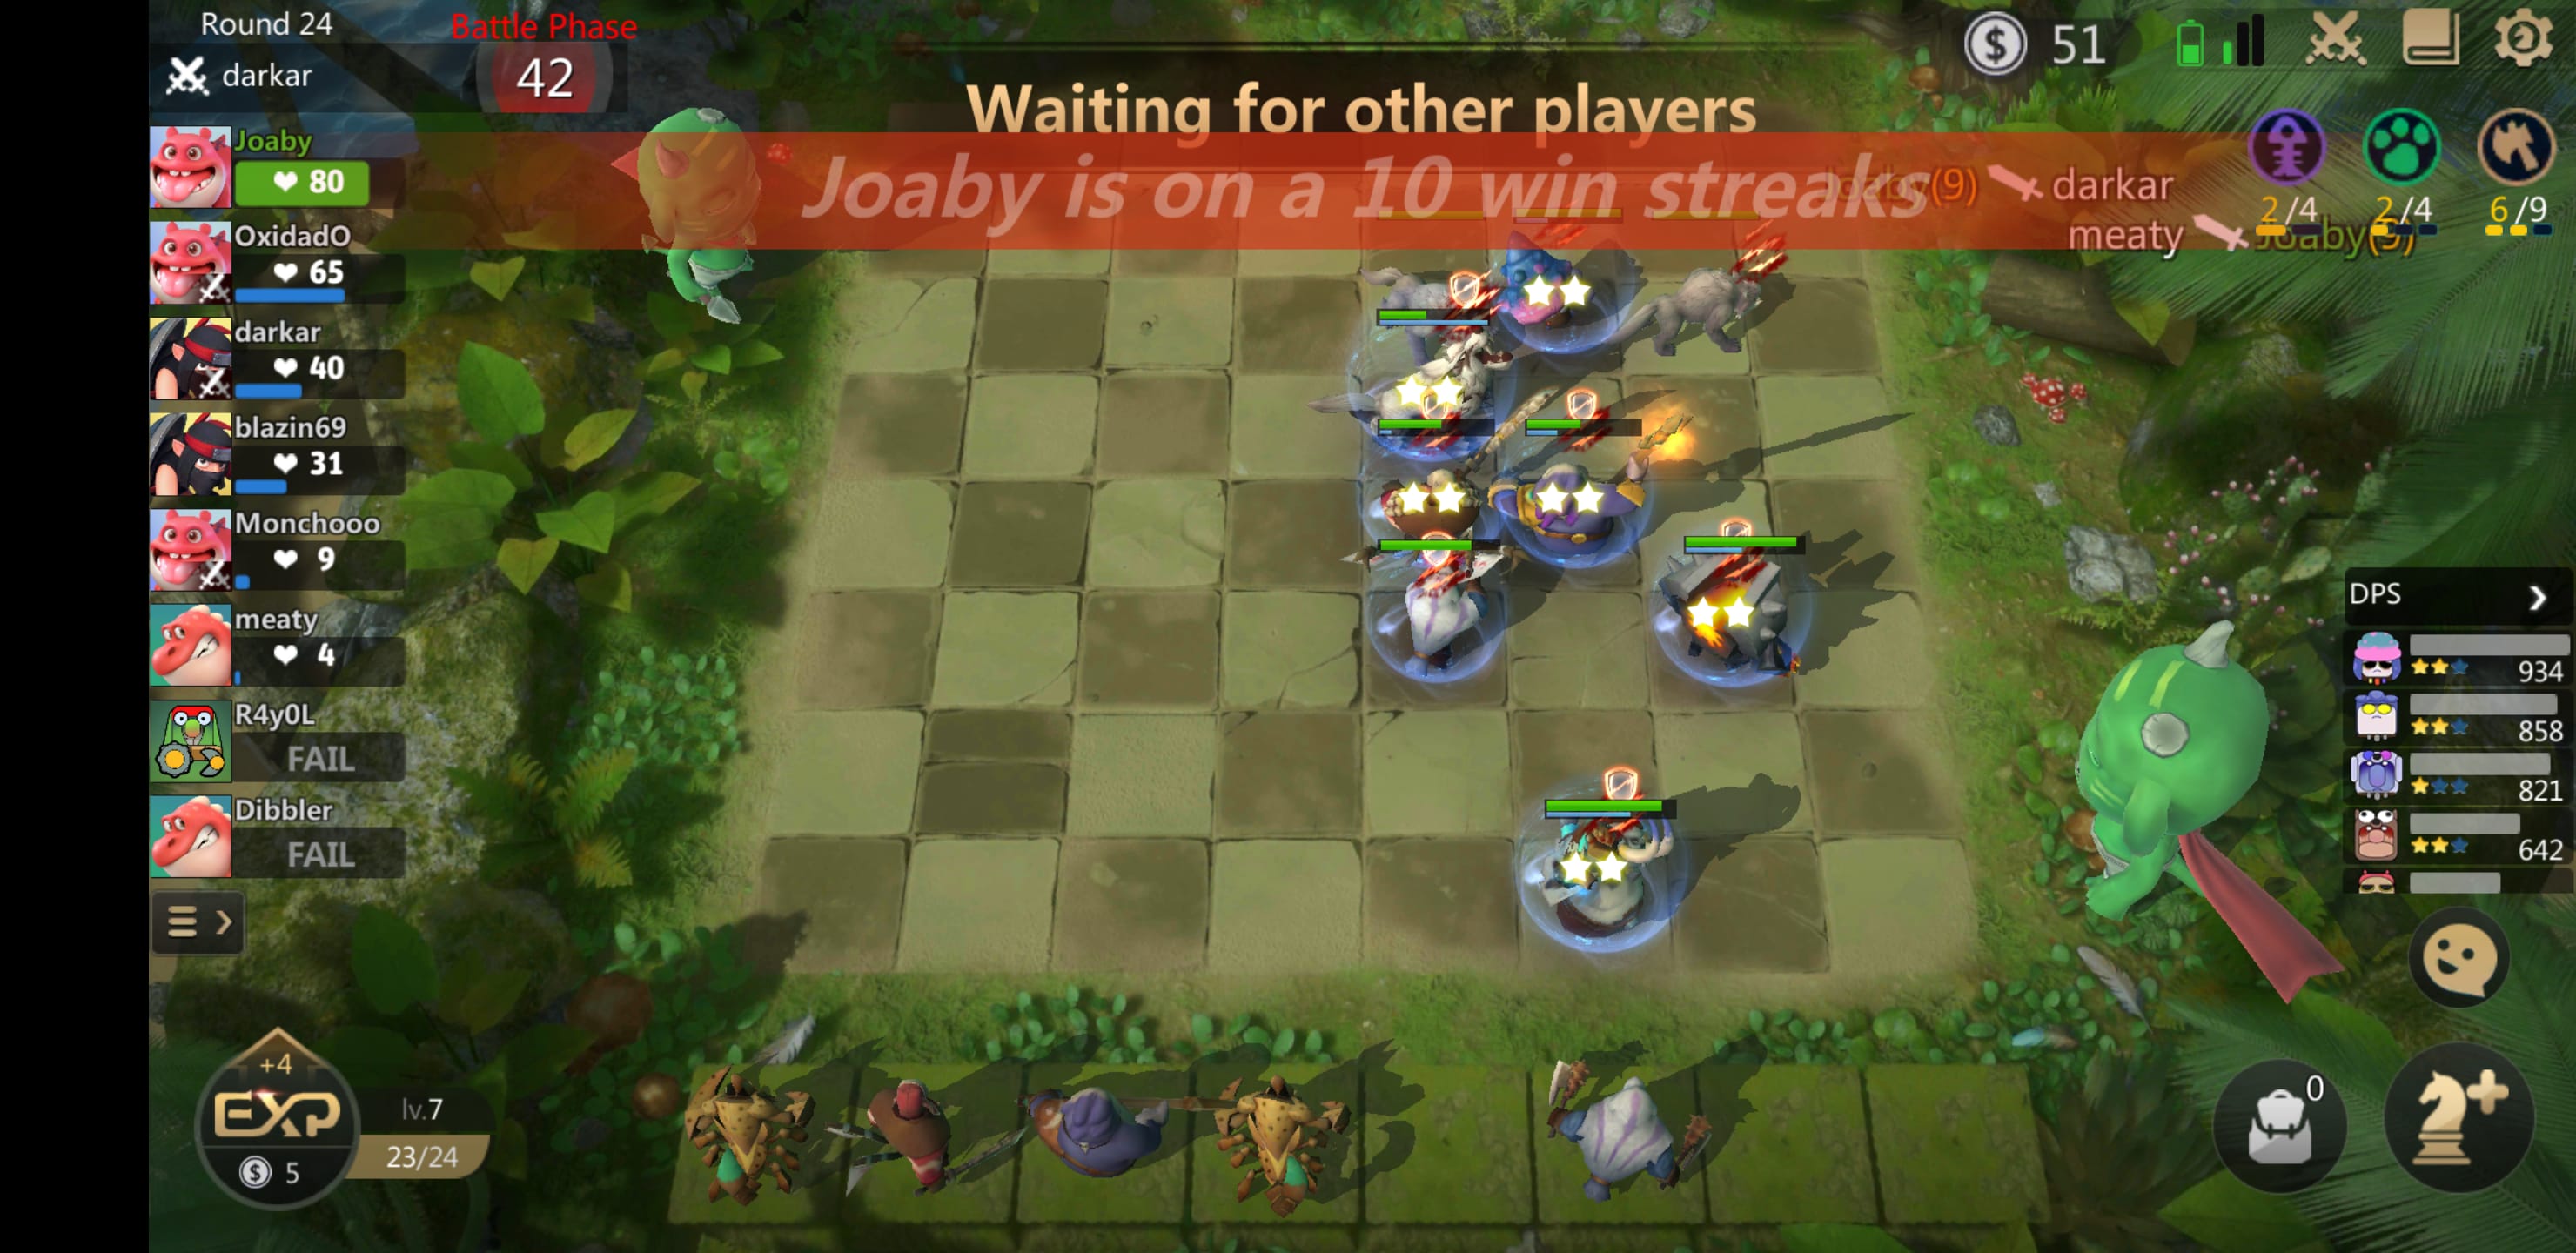 Auto Chess, A Dota 2 Mod, Is Getting Its Own MOBA Game. Wait, What